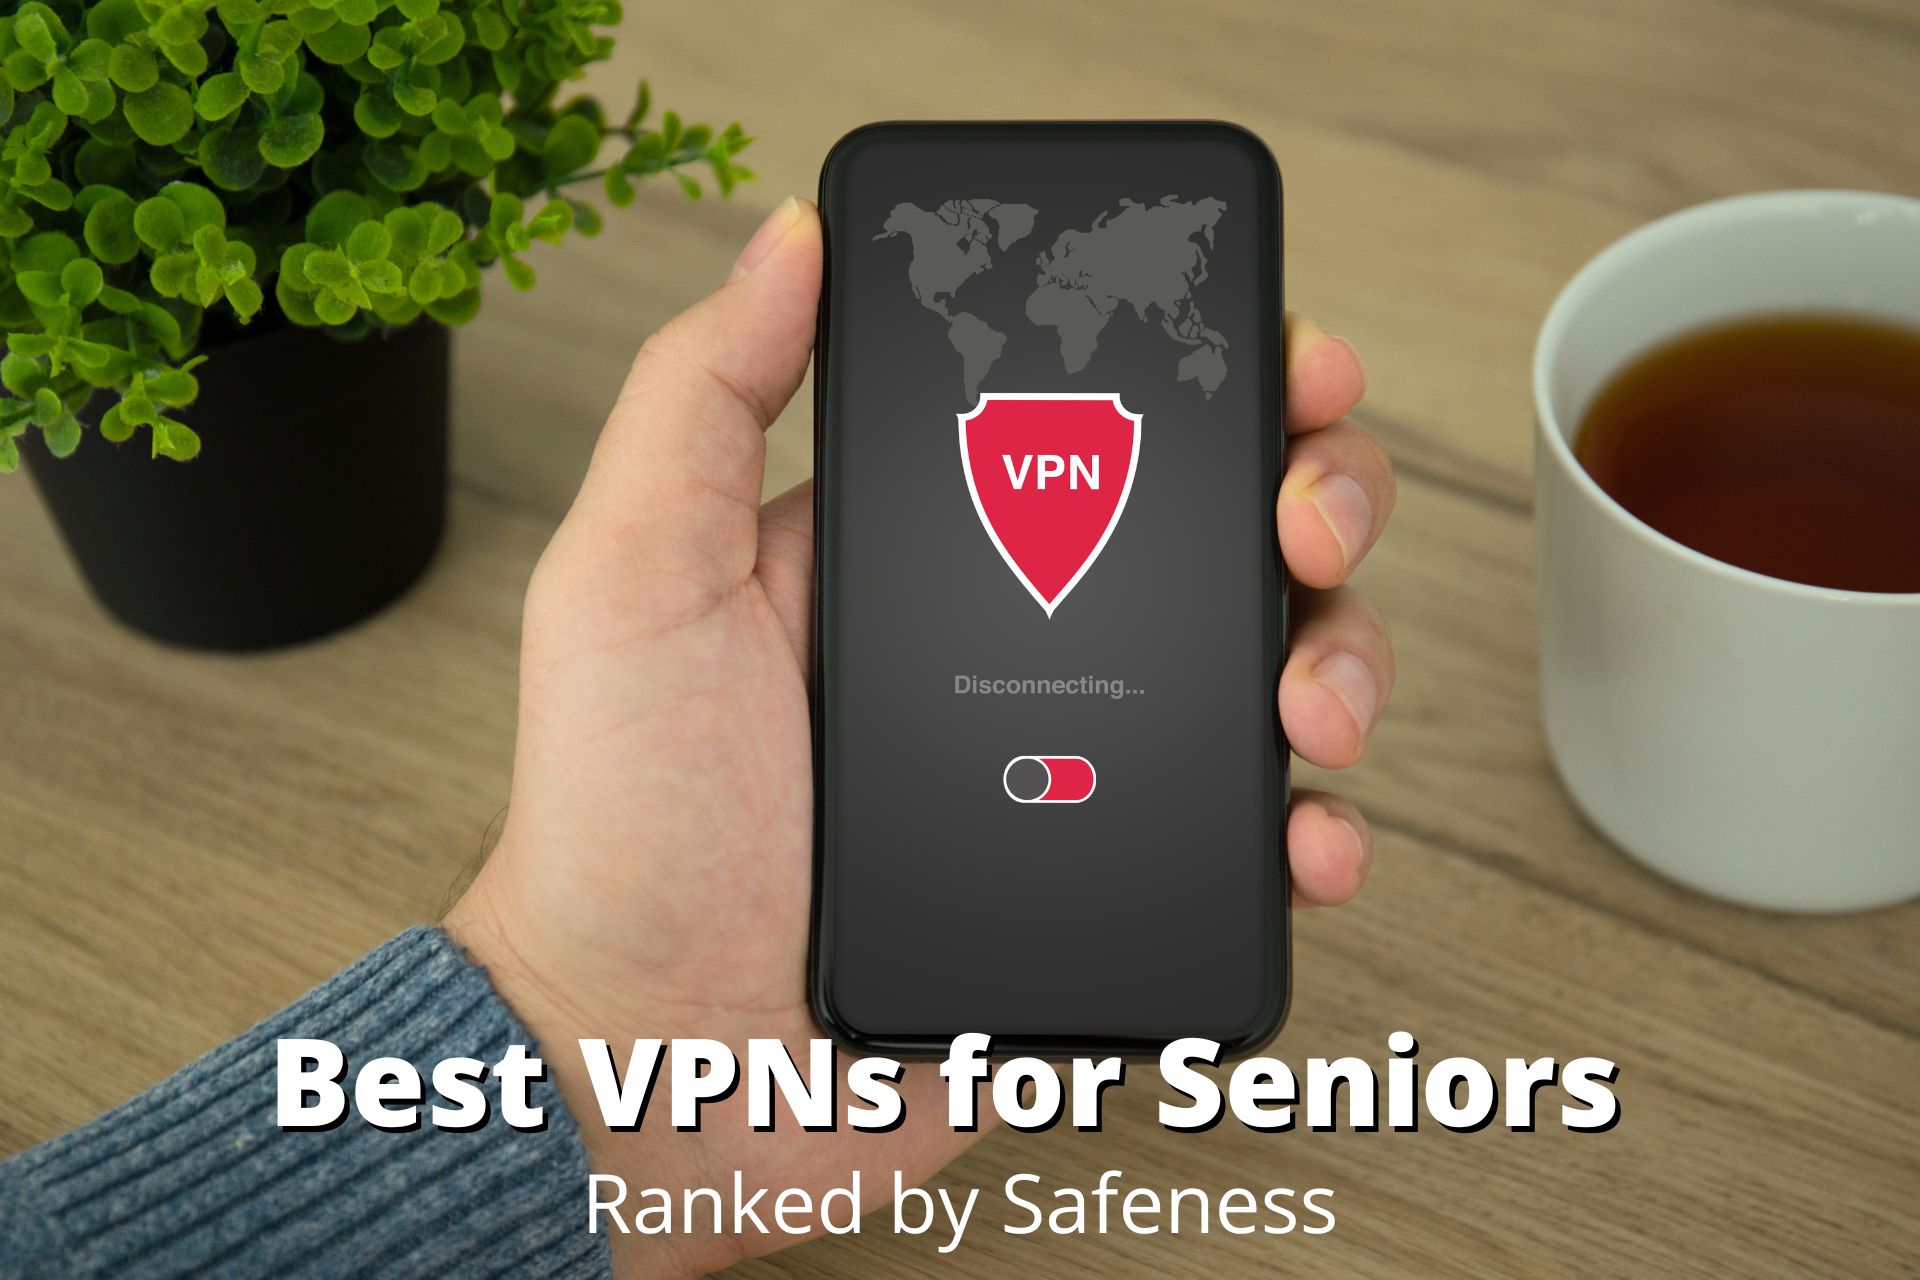 5 Best VPNs For Seniors Ranked by Safety and Ease of Use